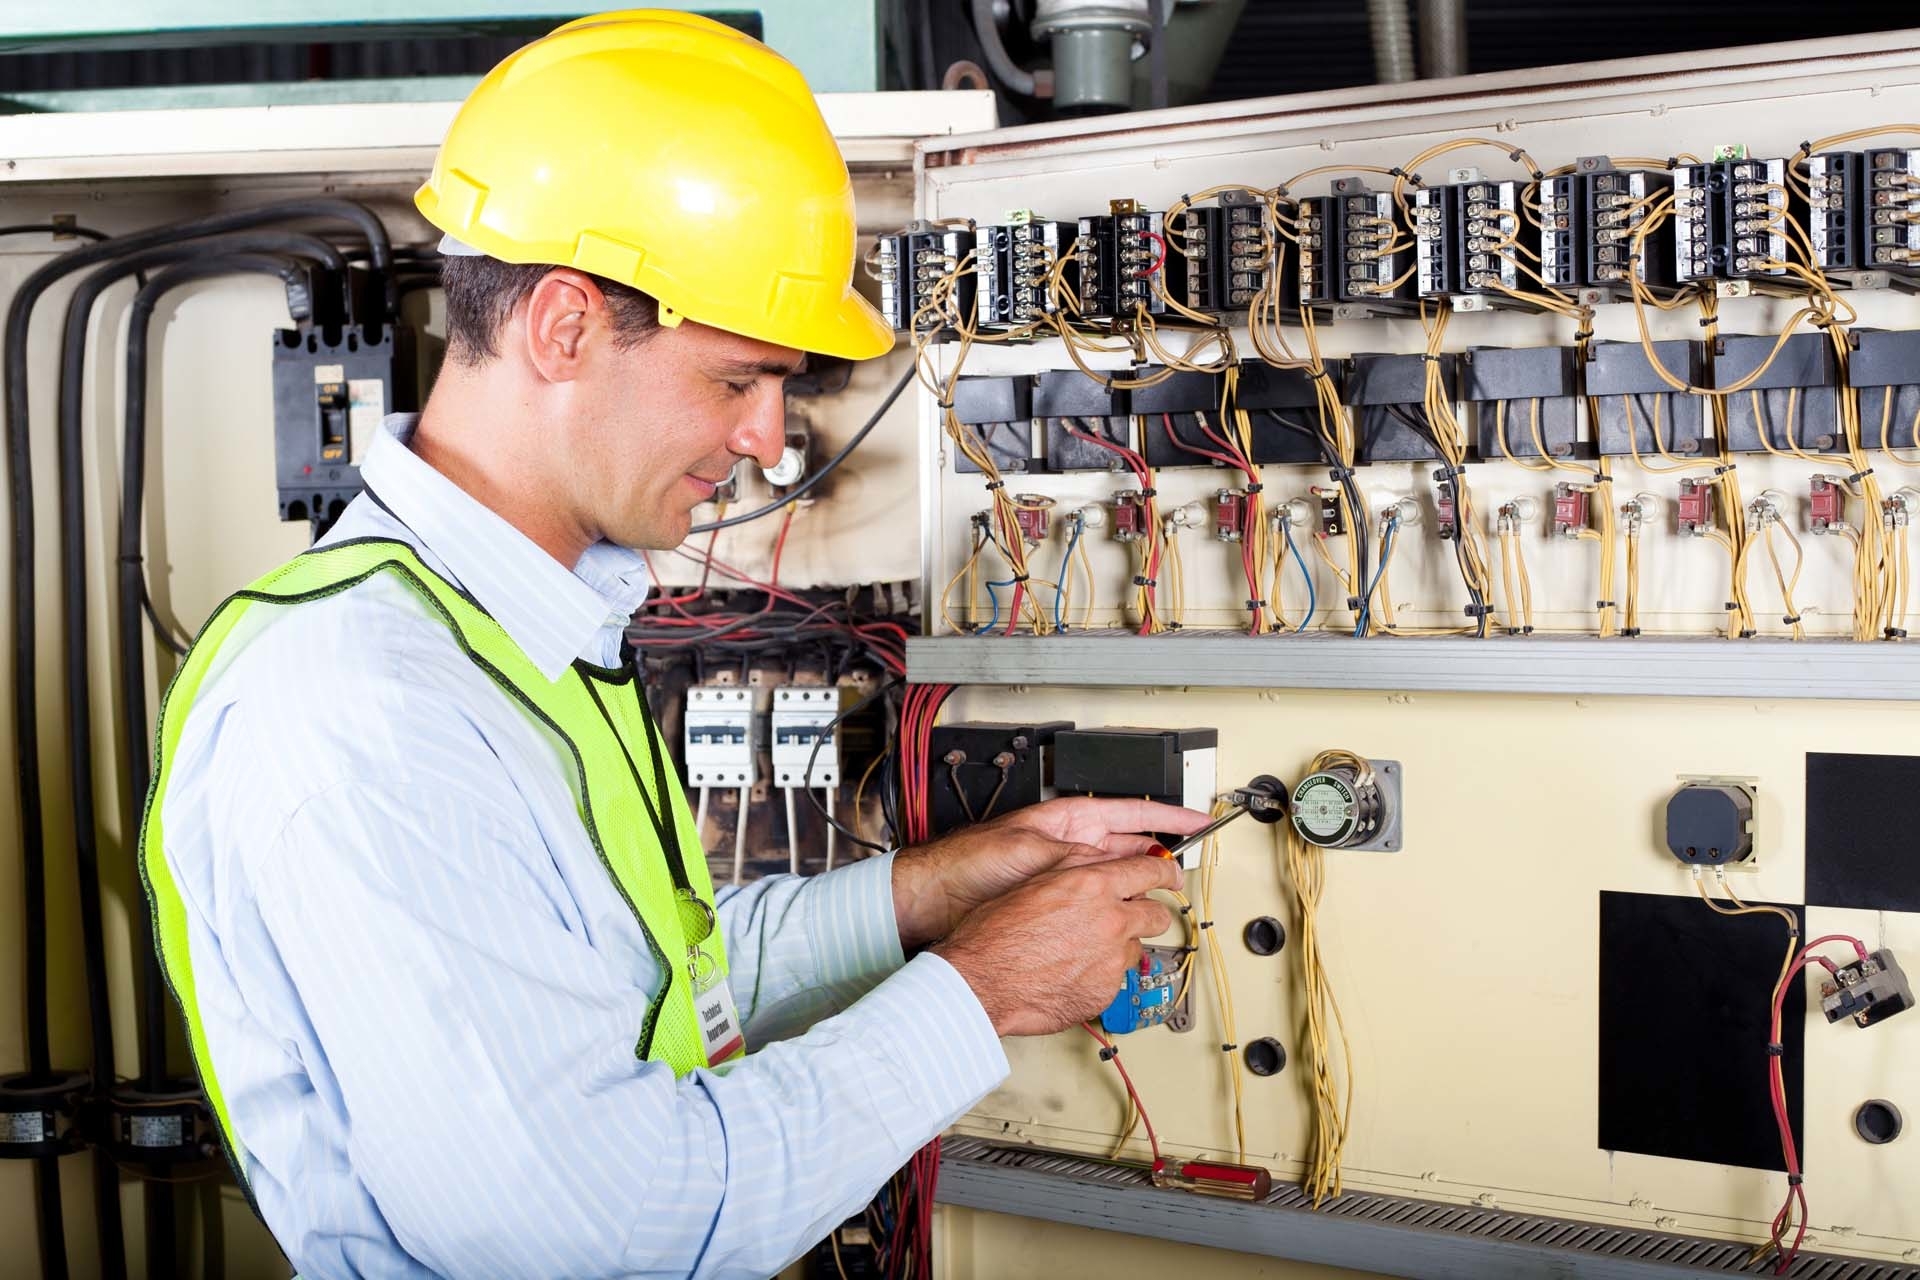 5 Tips To Local Electricians Much Better While Doing Other Things